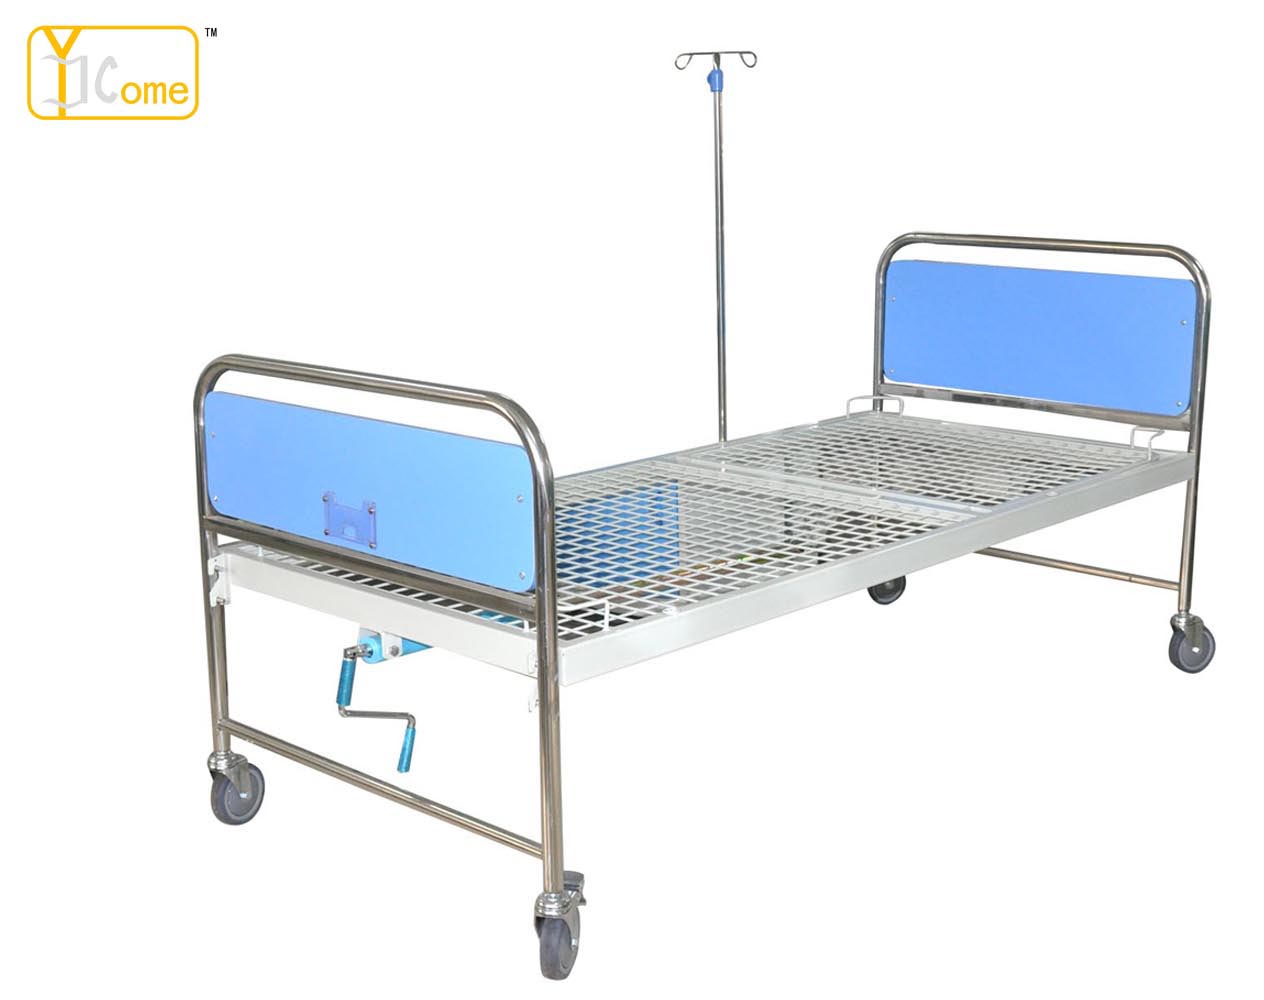 One Crank Hospital Bed